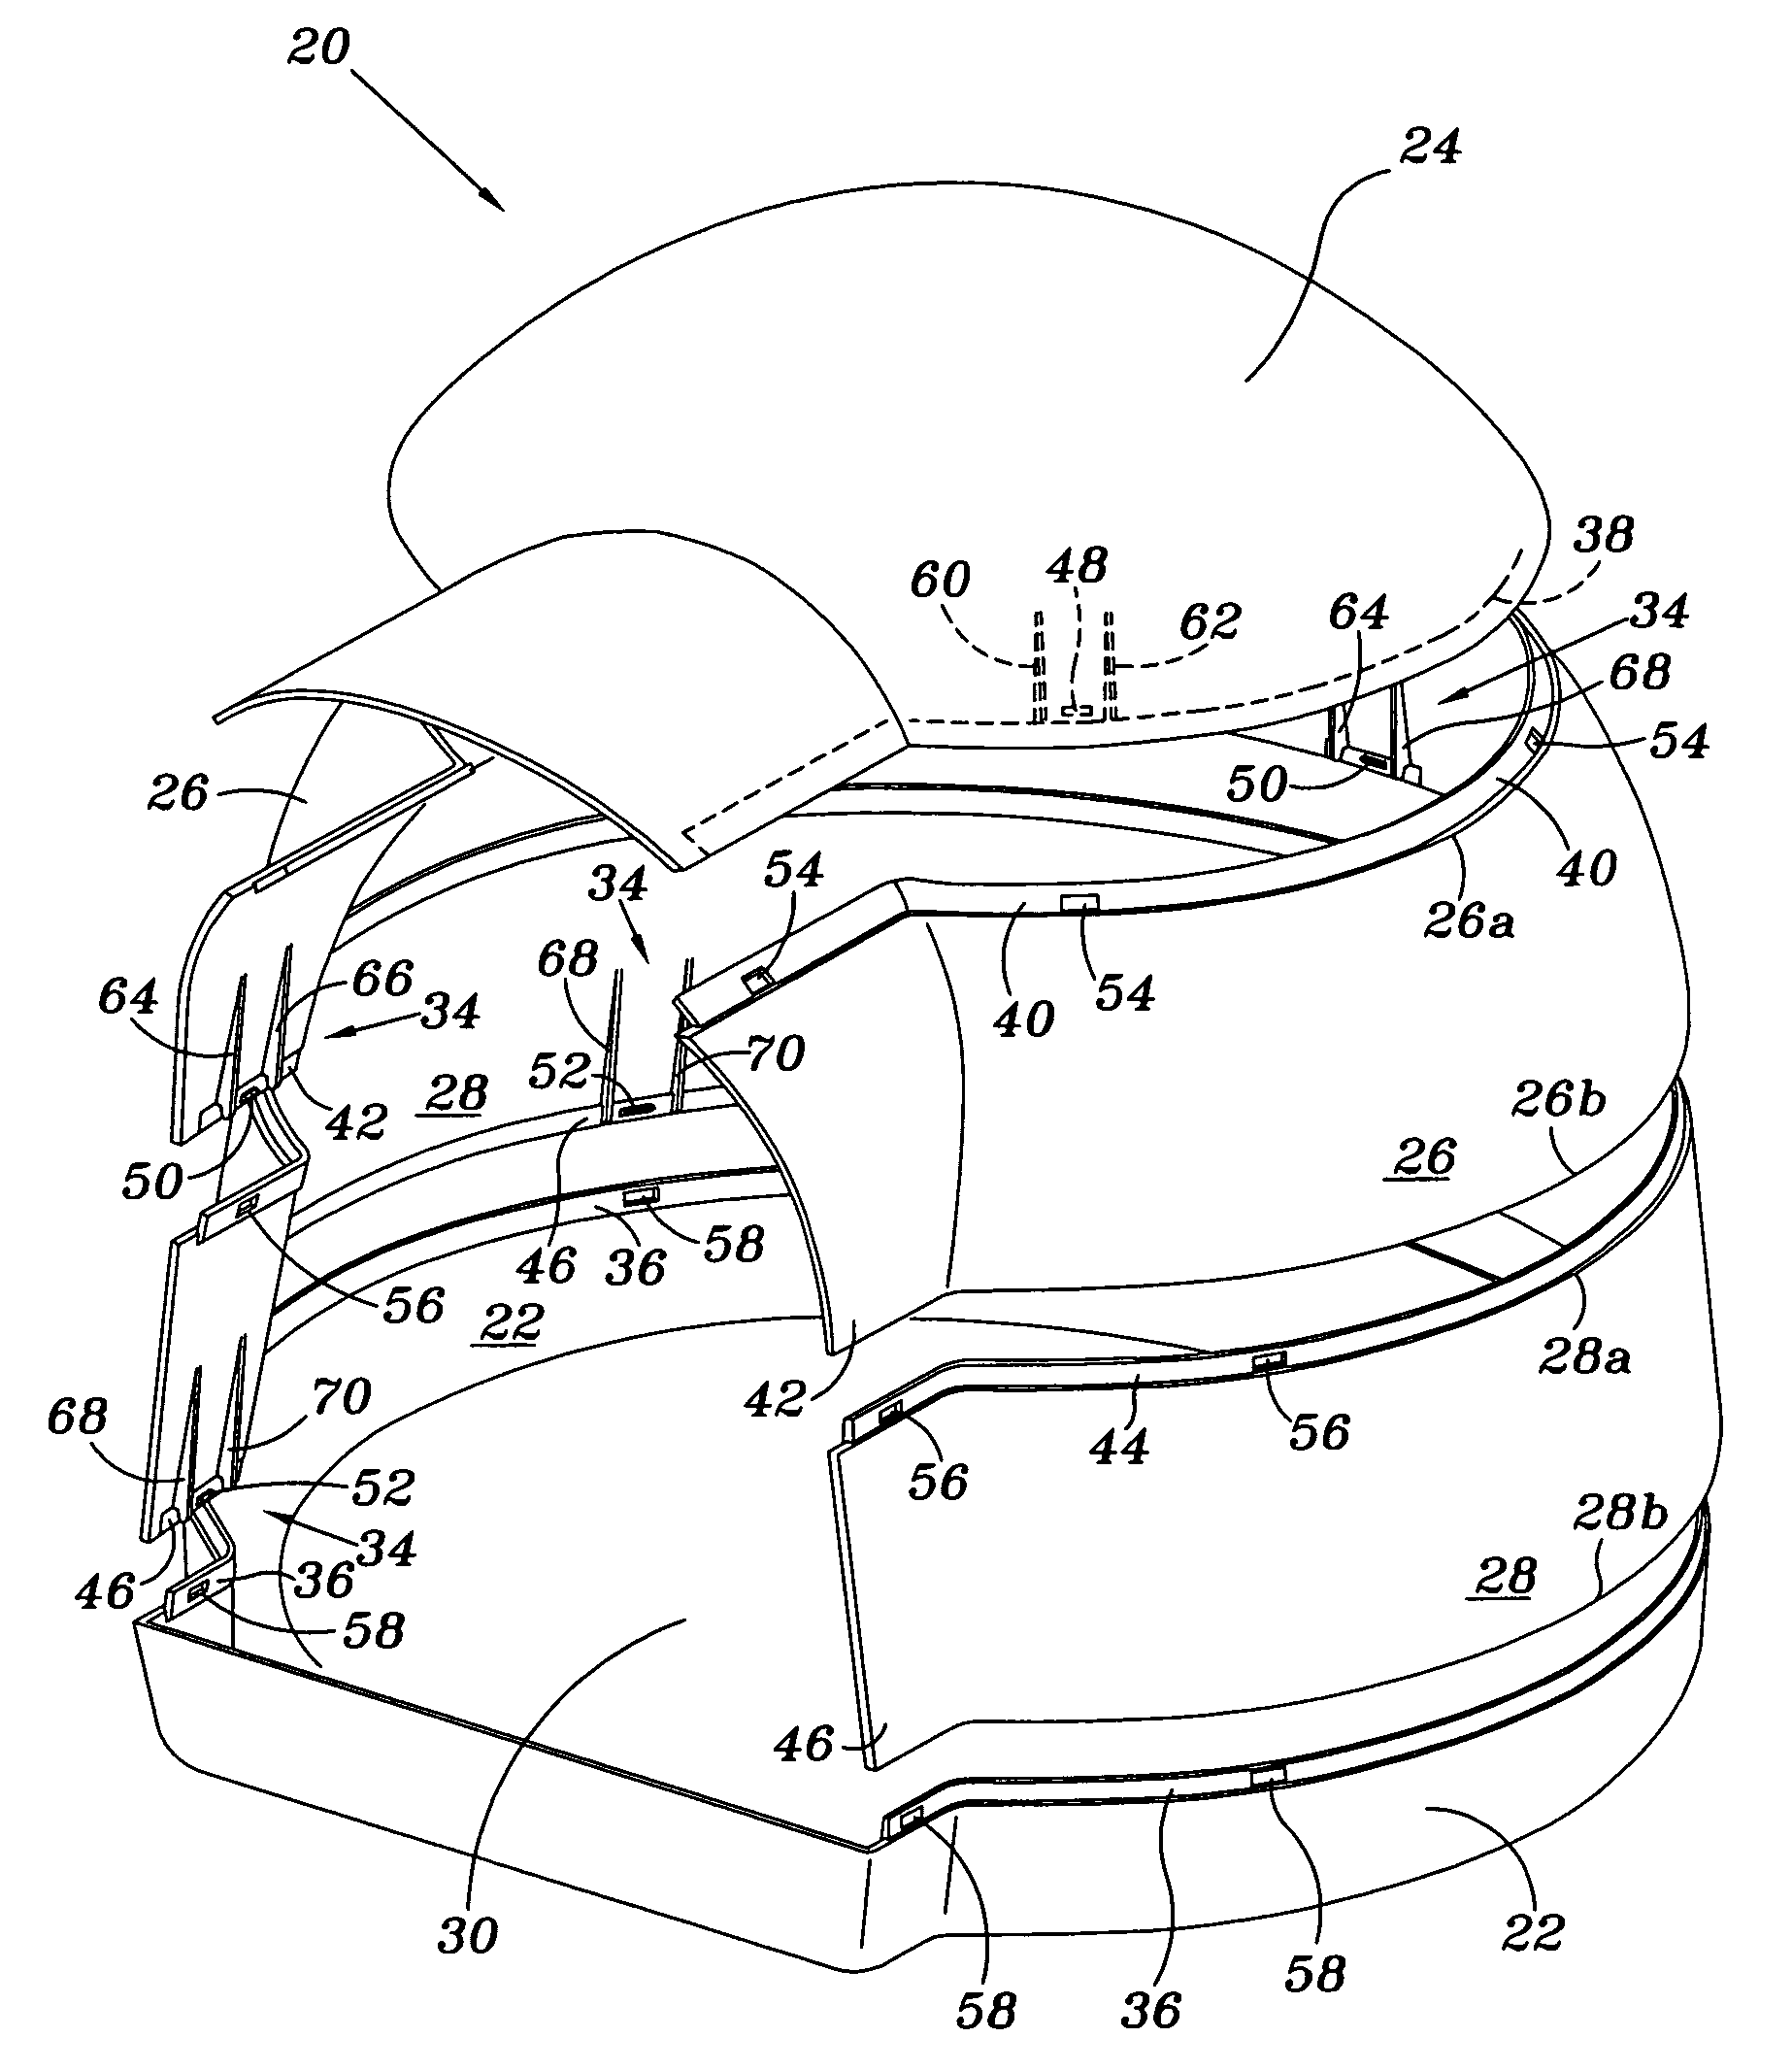 Pet shelter with self-interlocking components